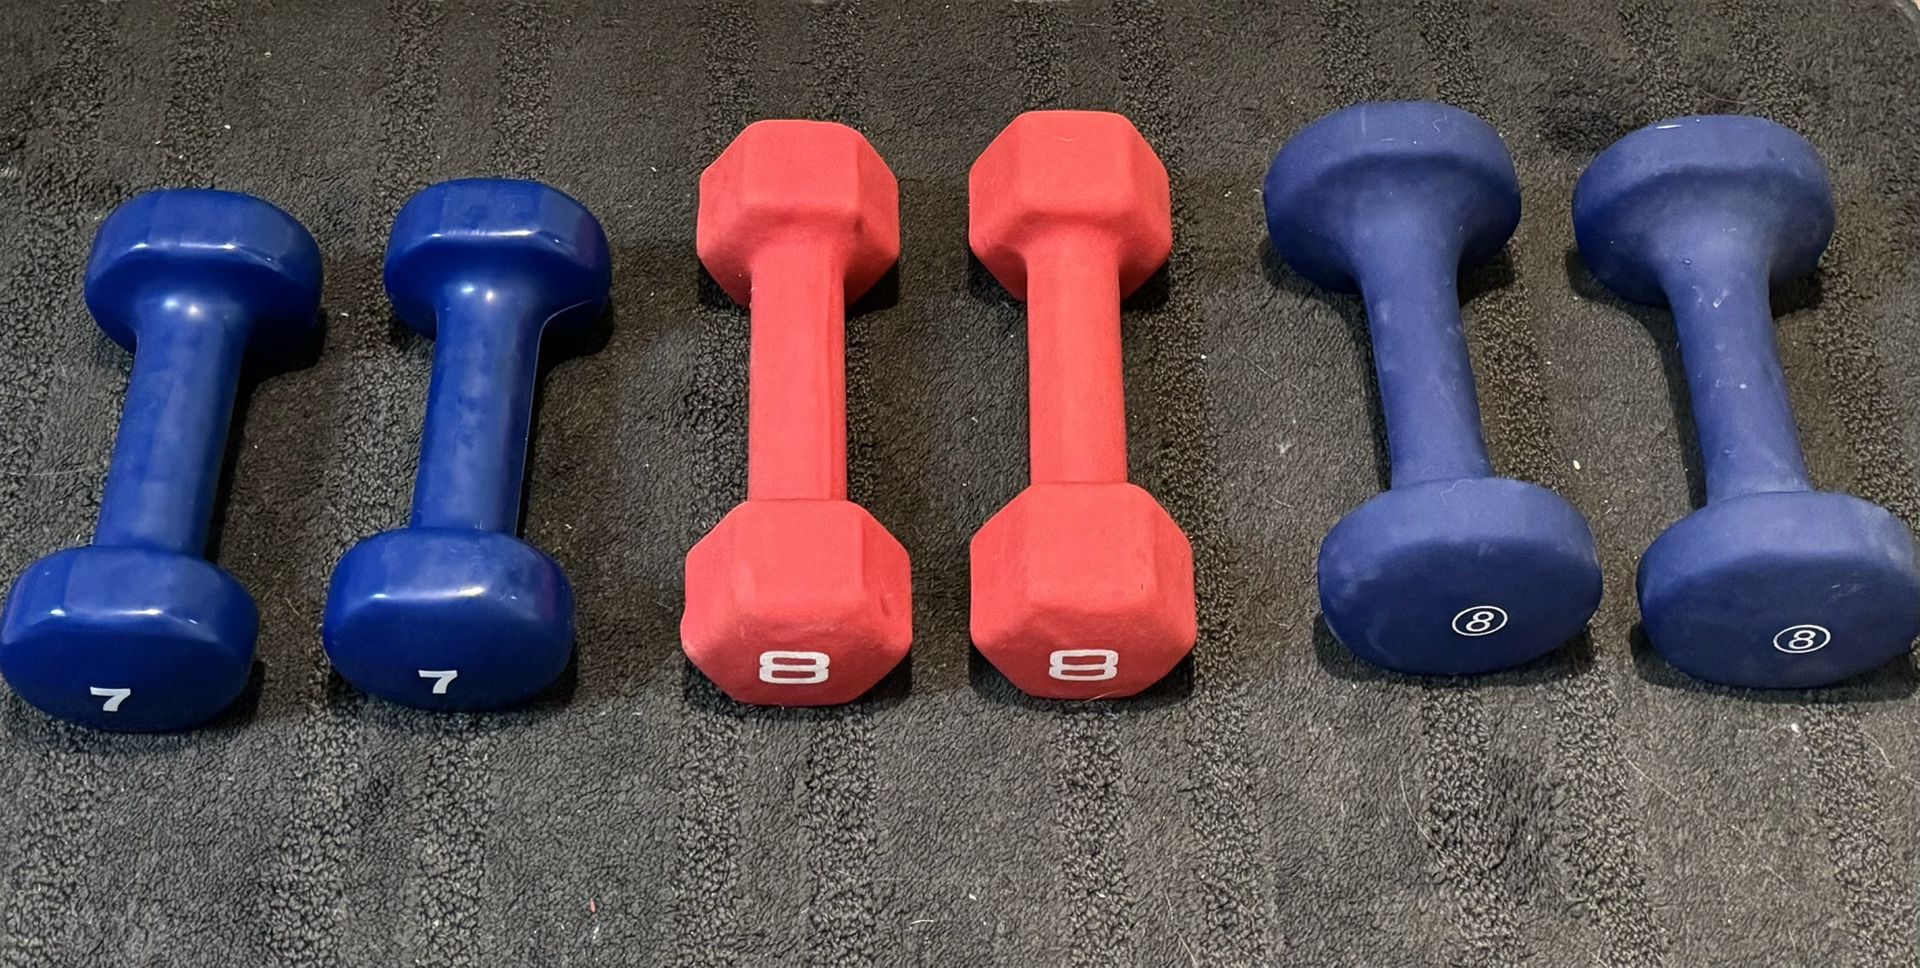 💪 8 lb and 7 lb Dumbbell Weights, Comfort Grips (new)